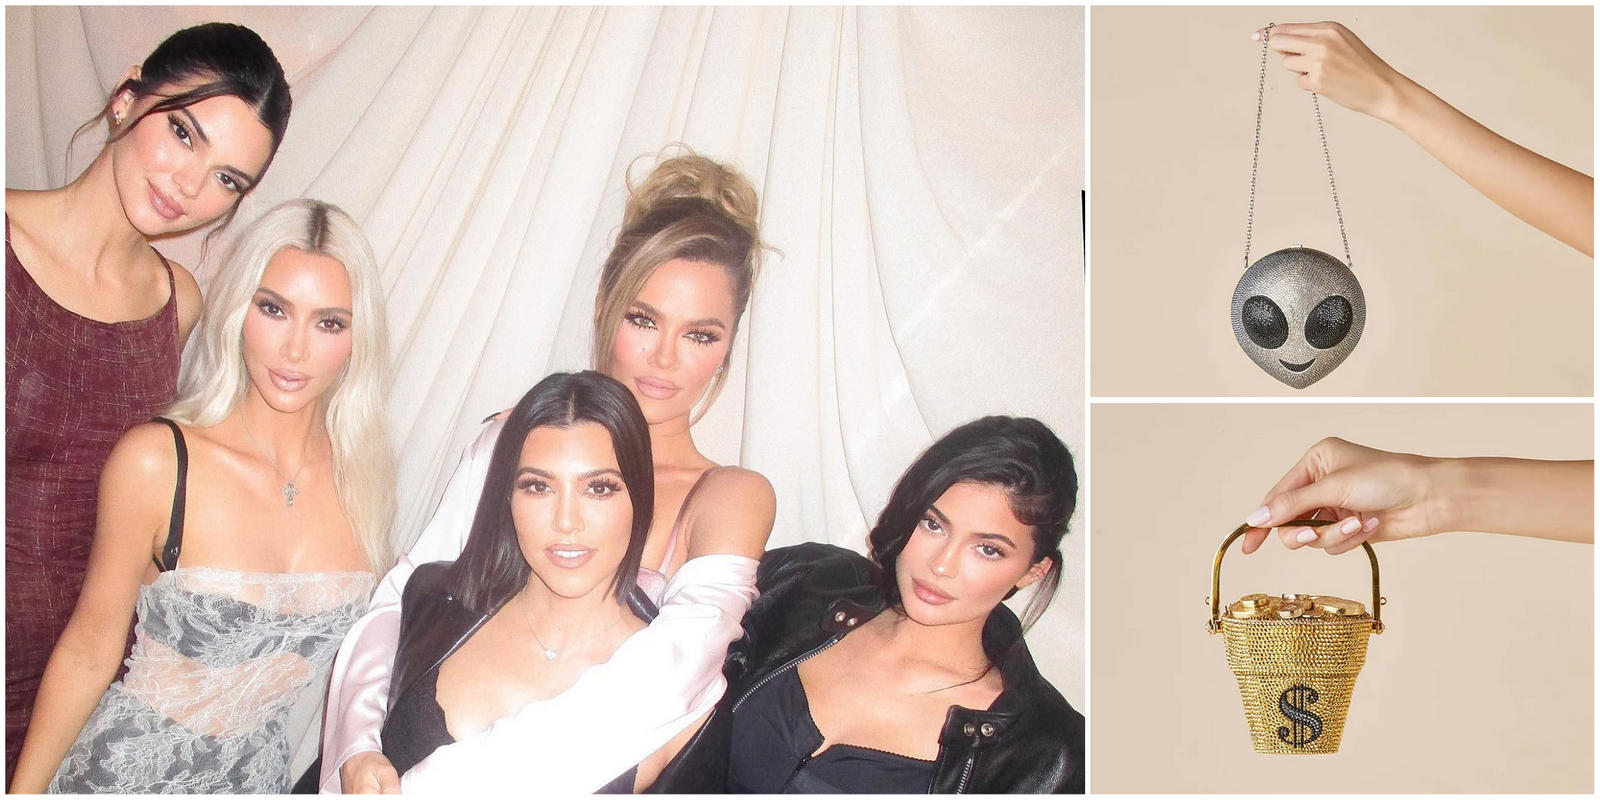 The Kardashians and Jenners have partnered with Judith Leiber for